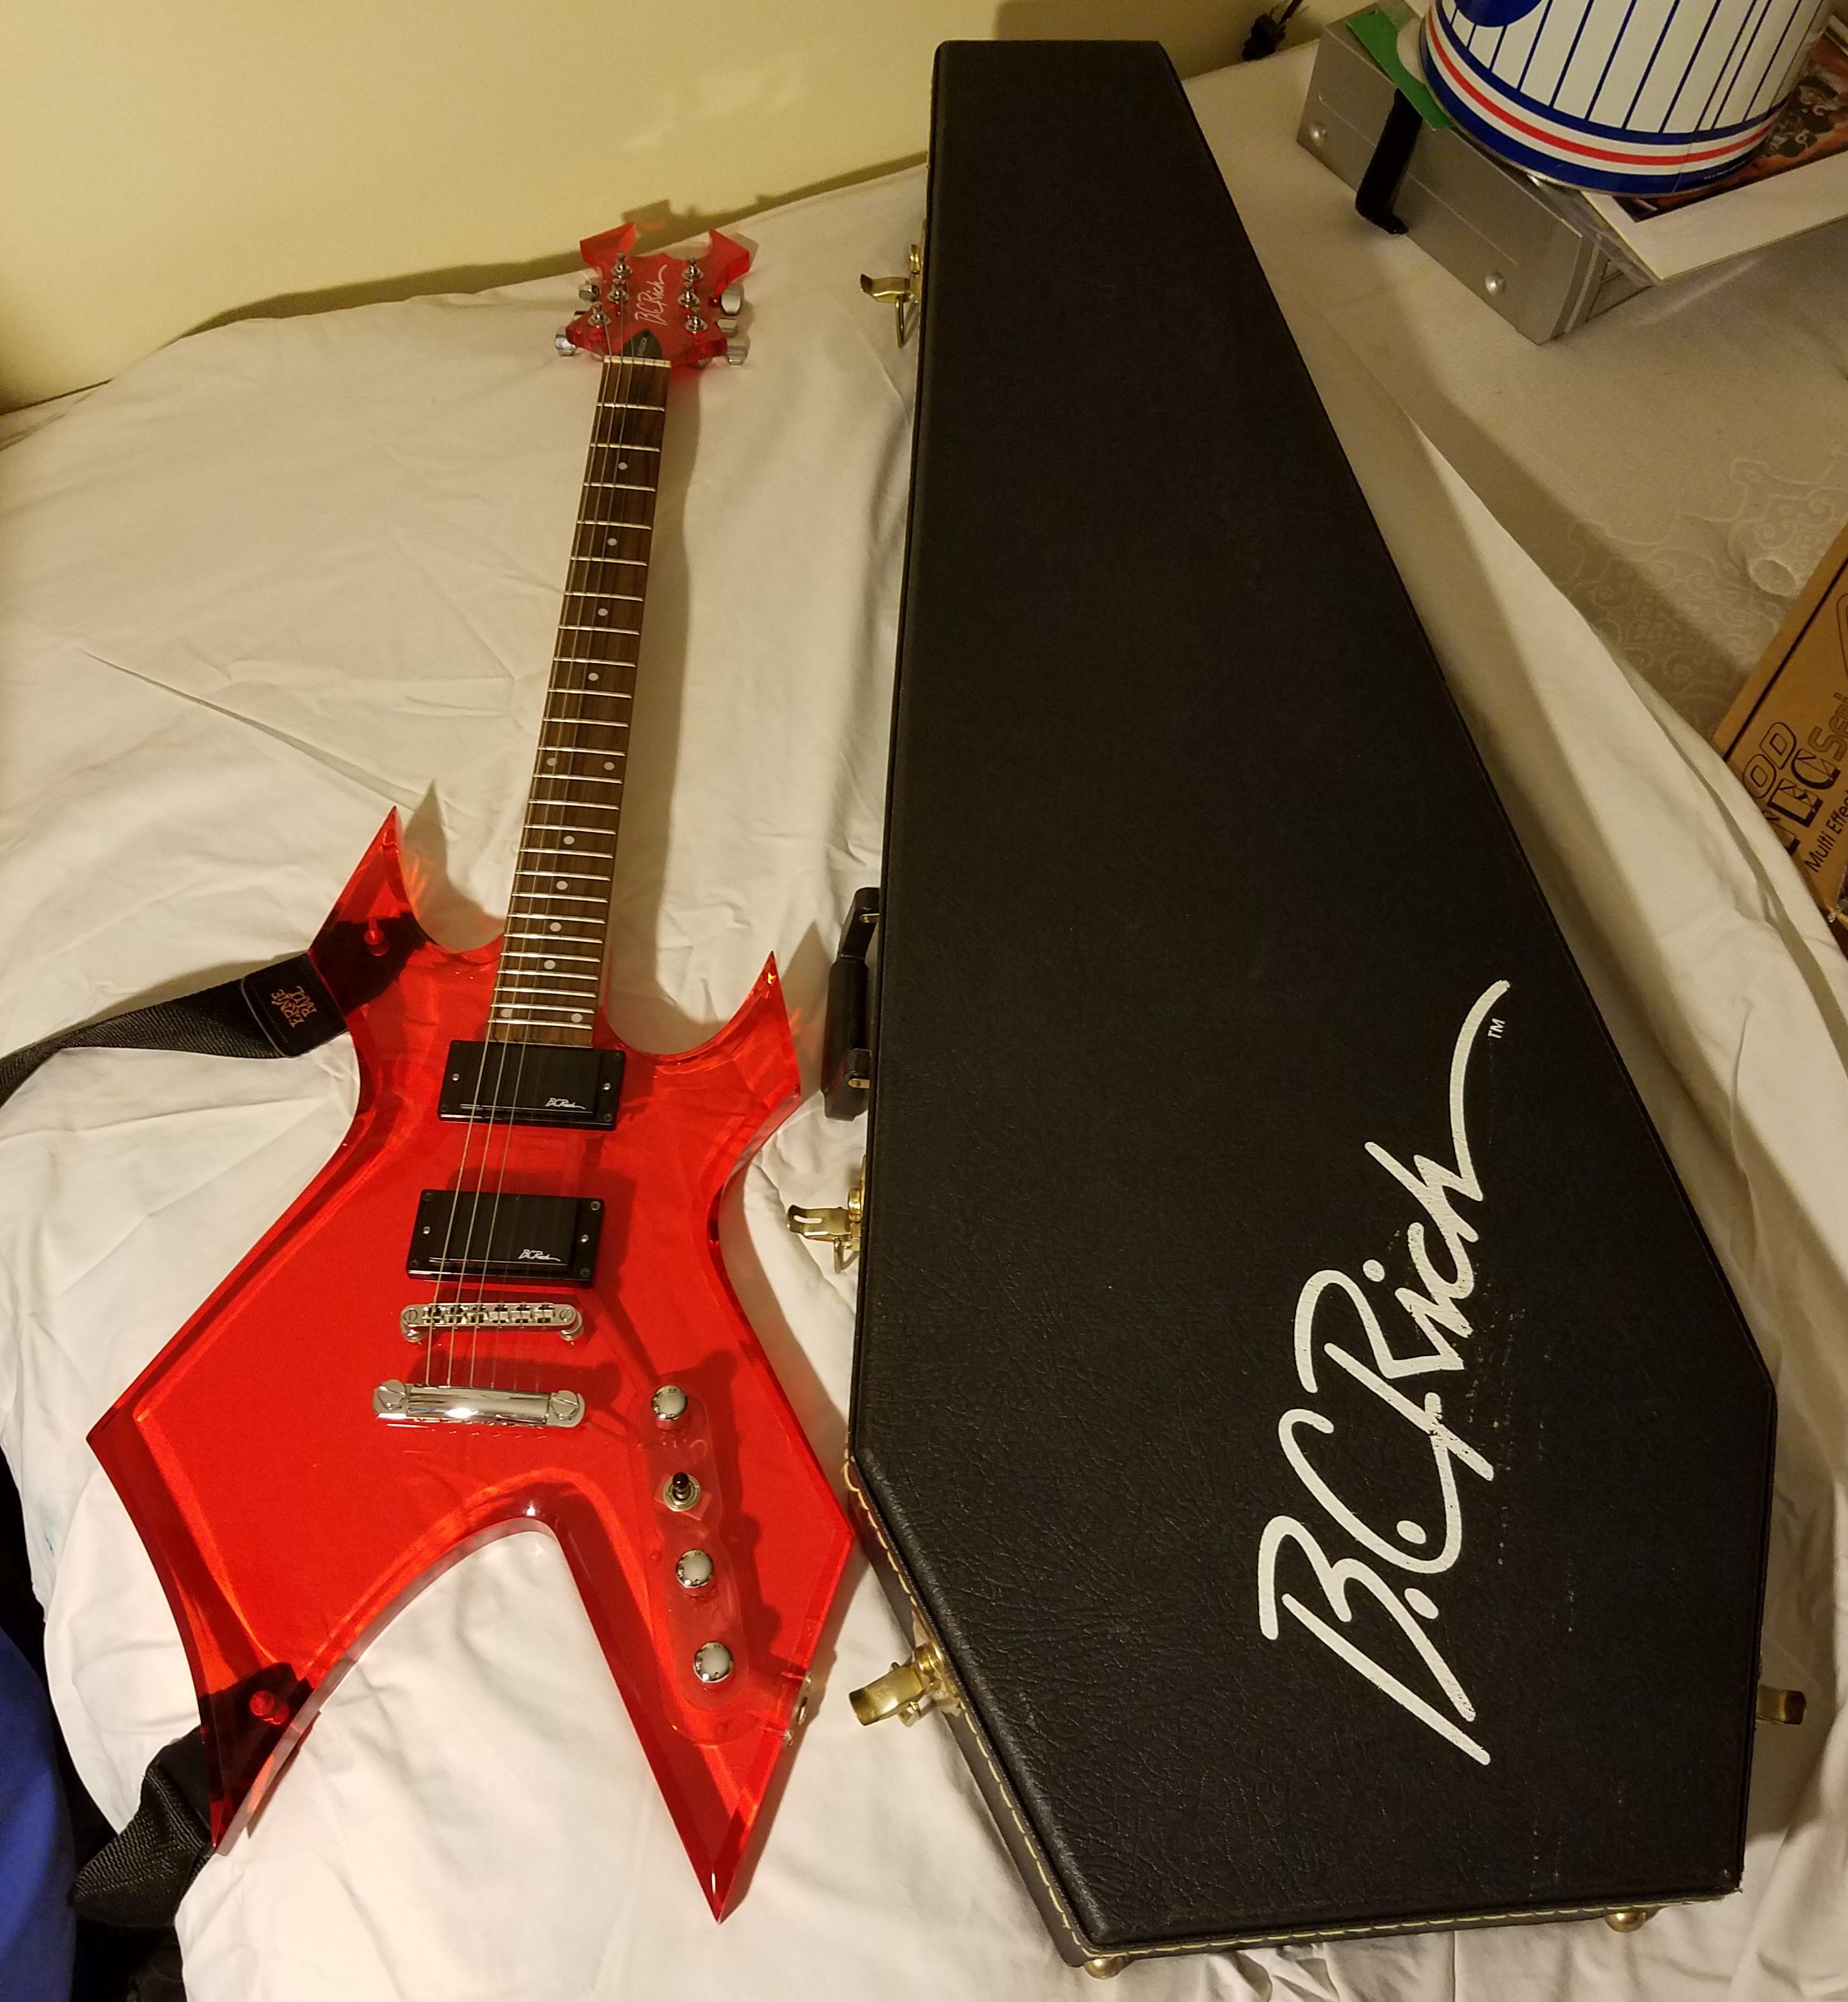 1999 BC Rich Acrylic Red GuitarGuitar Reduced $450.00 for Sale Hanover Park, IL - OfferUp